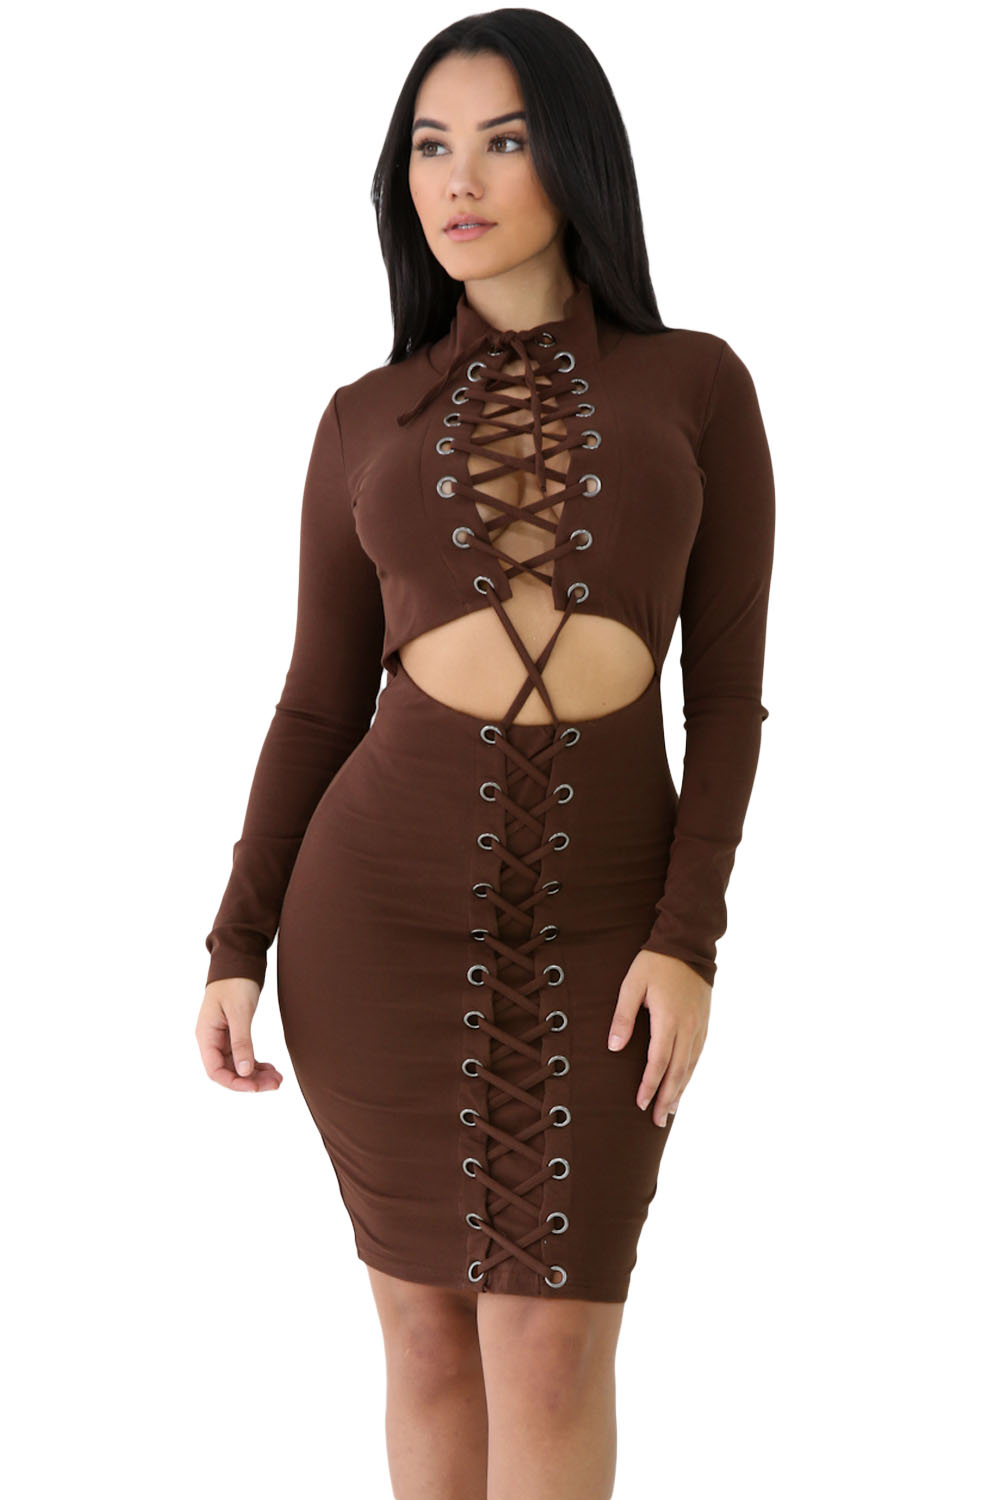 Brown Lace-up Corset Cut Out Long Sleeve Dress